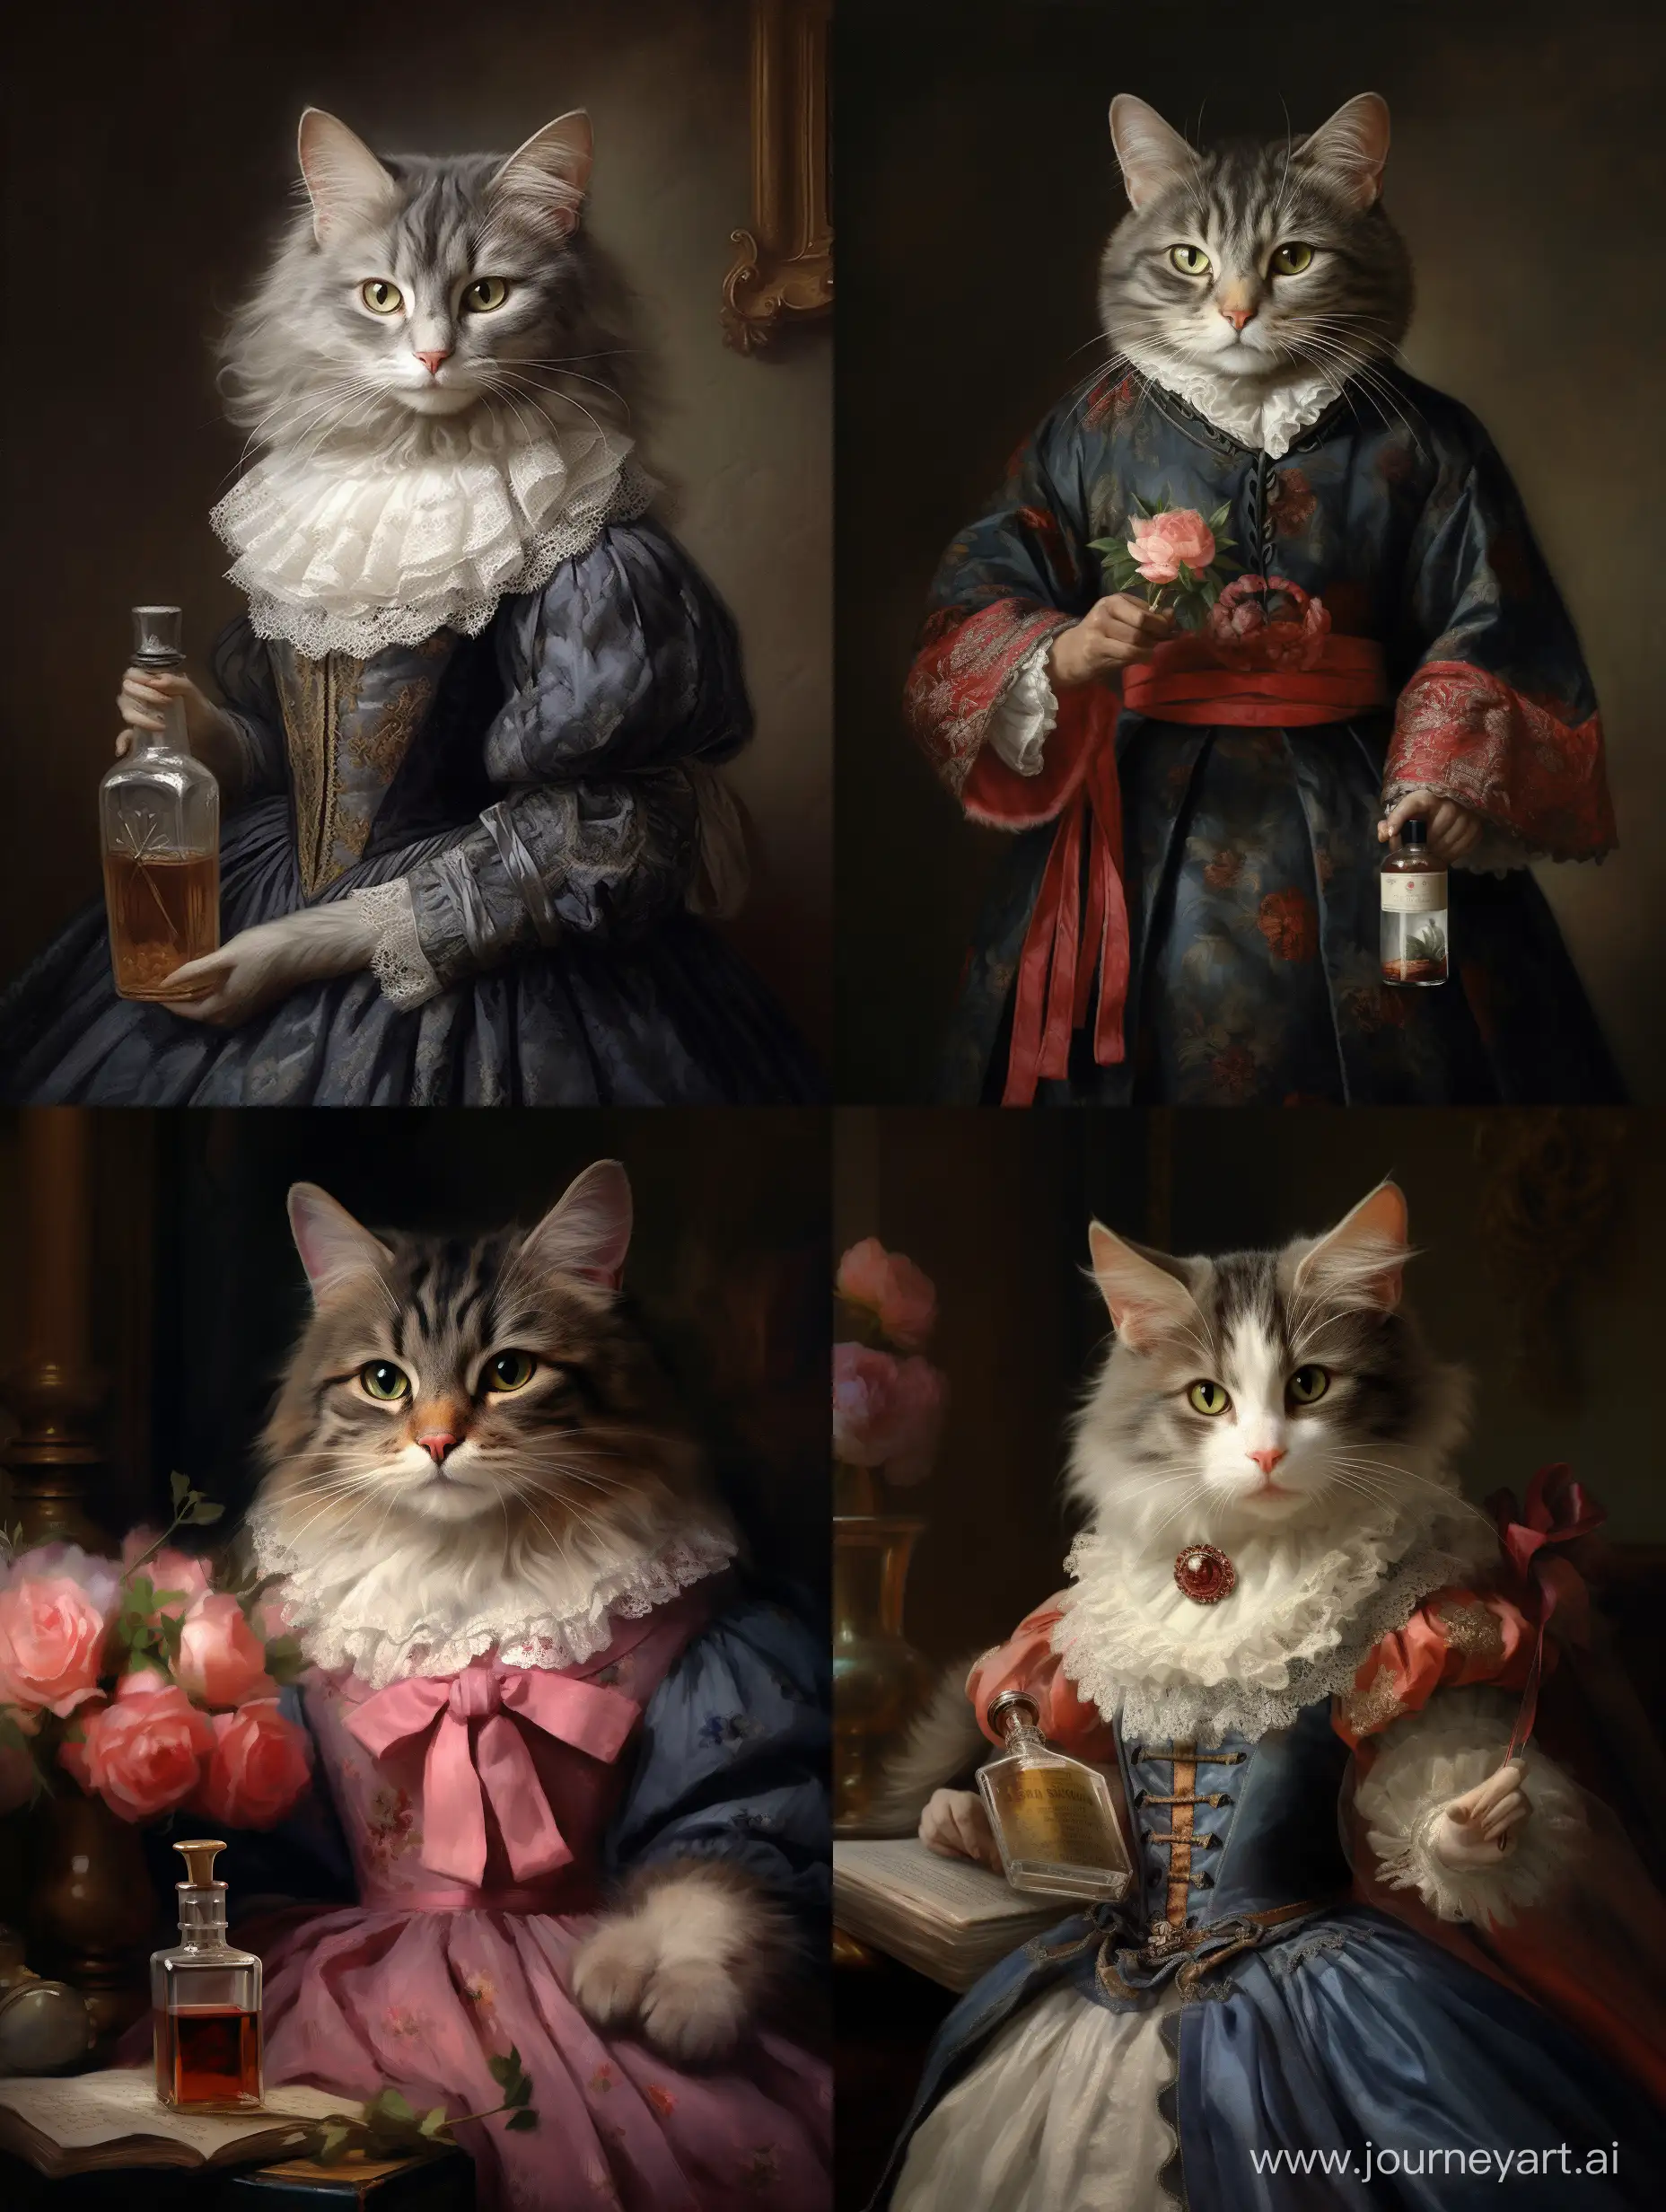 Cat-Wearing-Womens-Clothing-with-Perfume-Bottle